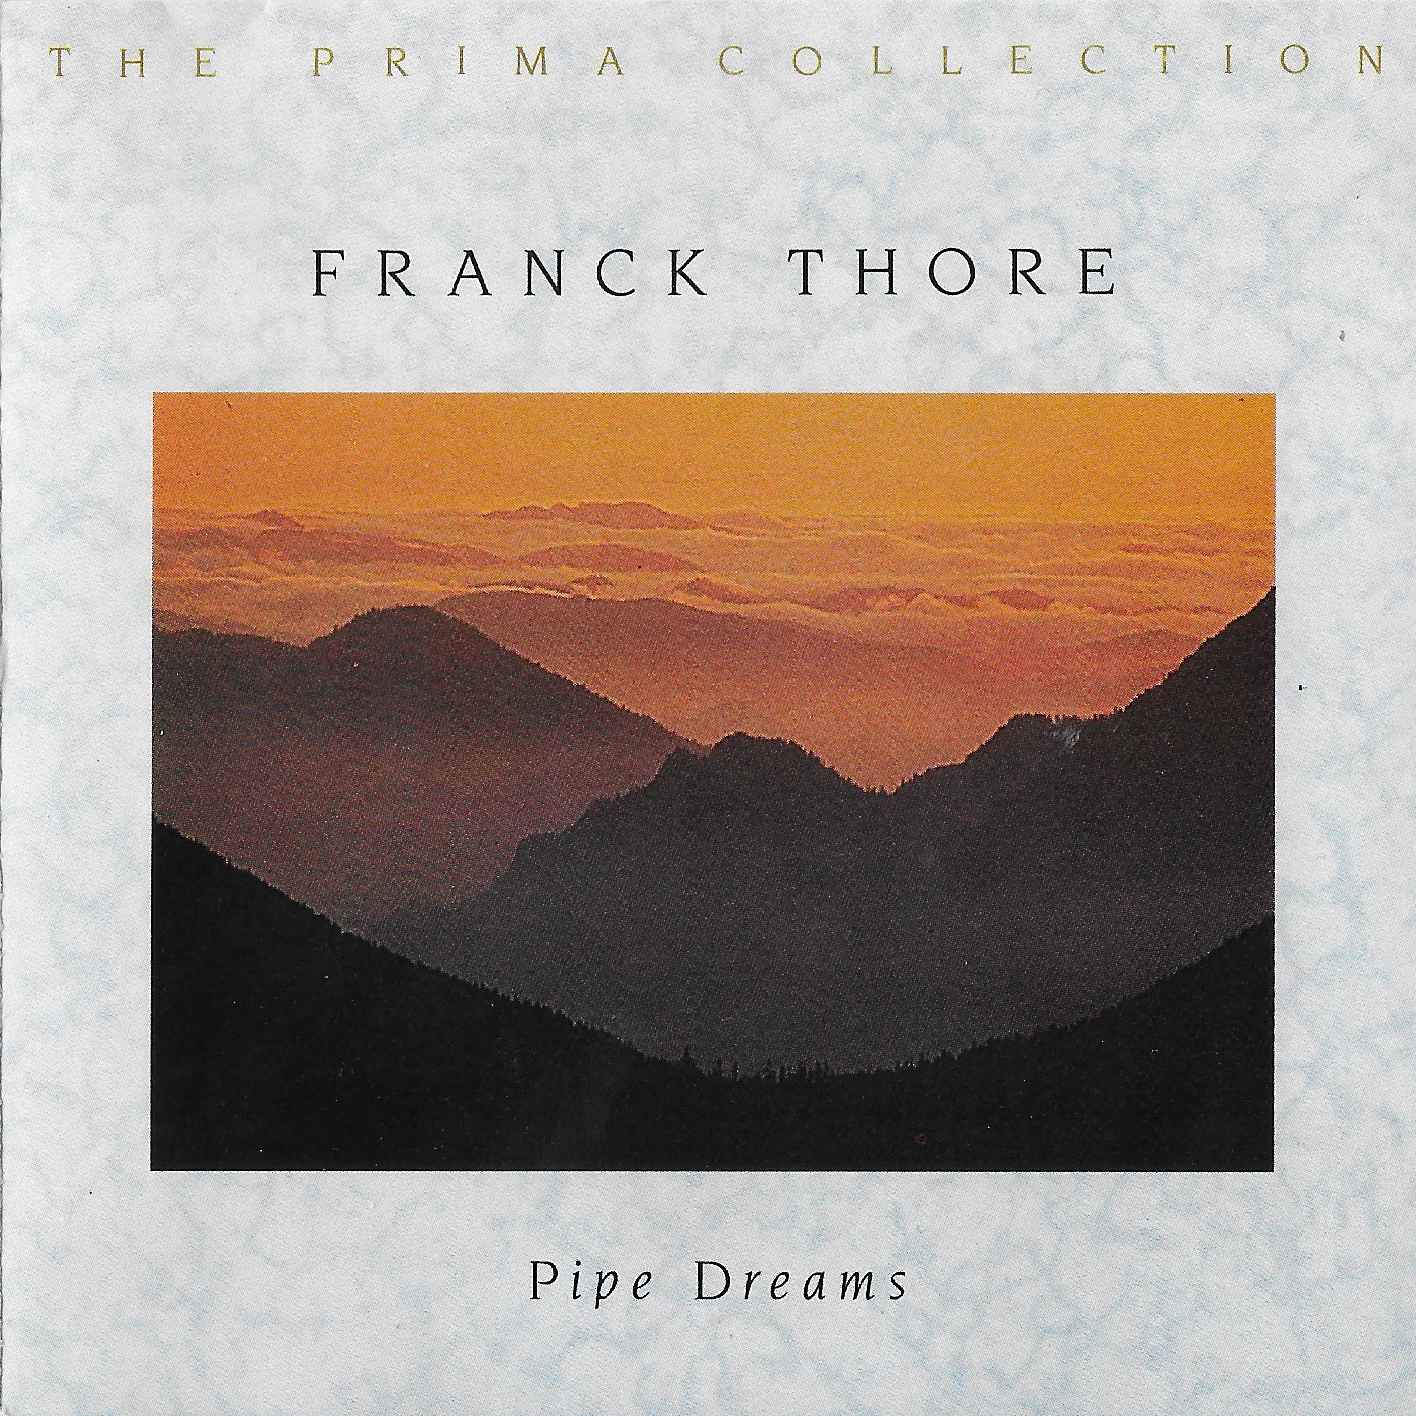 Picture of CDPM 6002 Pipe dreams by artist Frank Thore from the BBC cds - Records and Tapes library